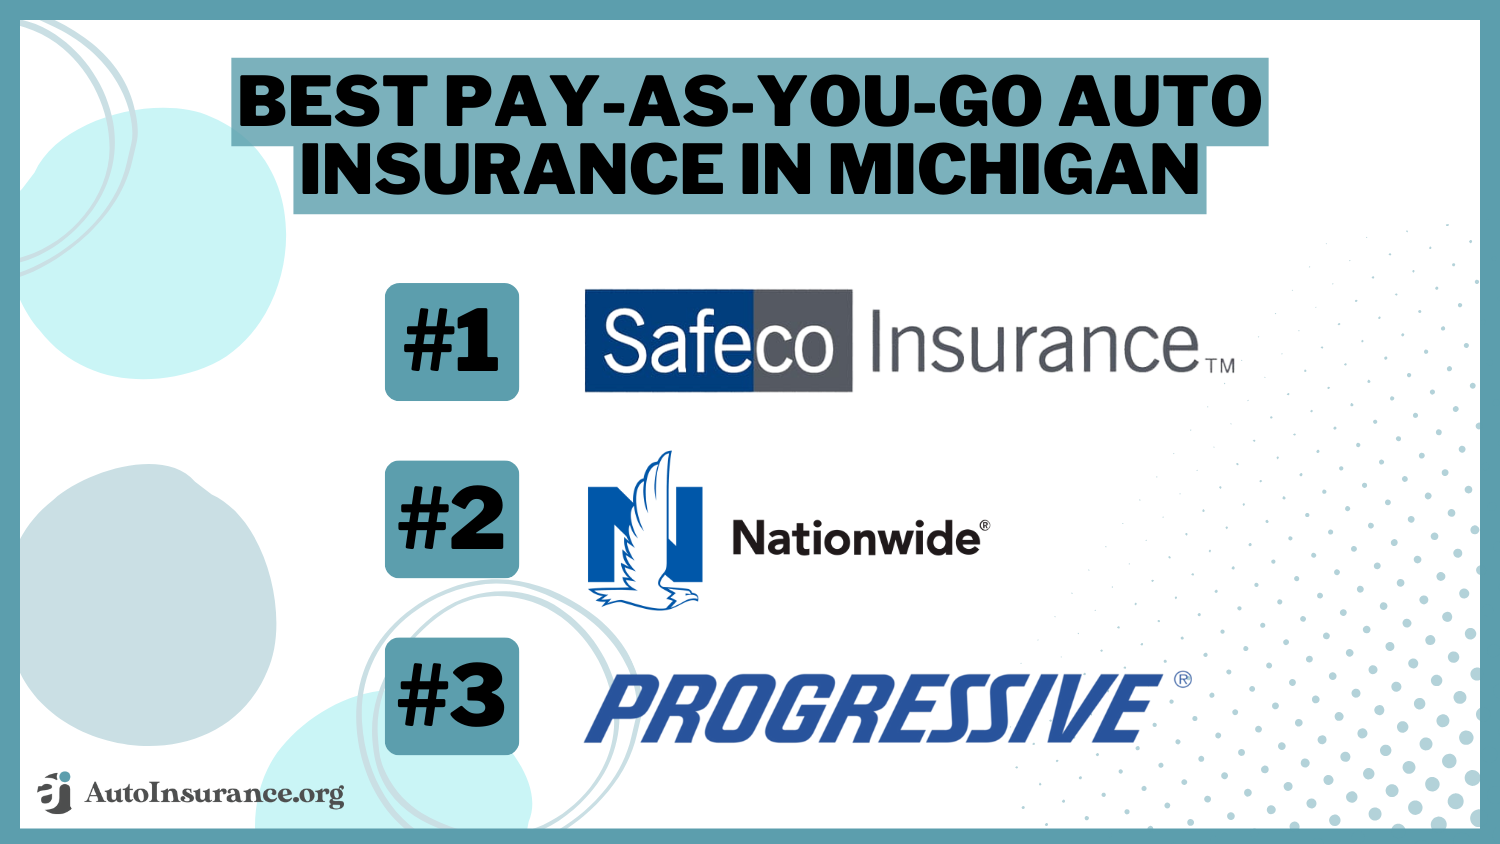 Best Pay-As-You-Go Auto Insurance in Michigan: Safeco, Nationwide, Progressive